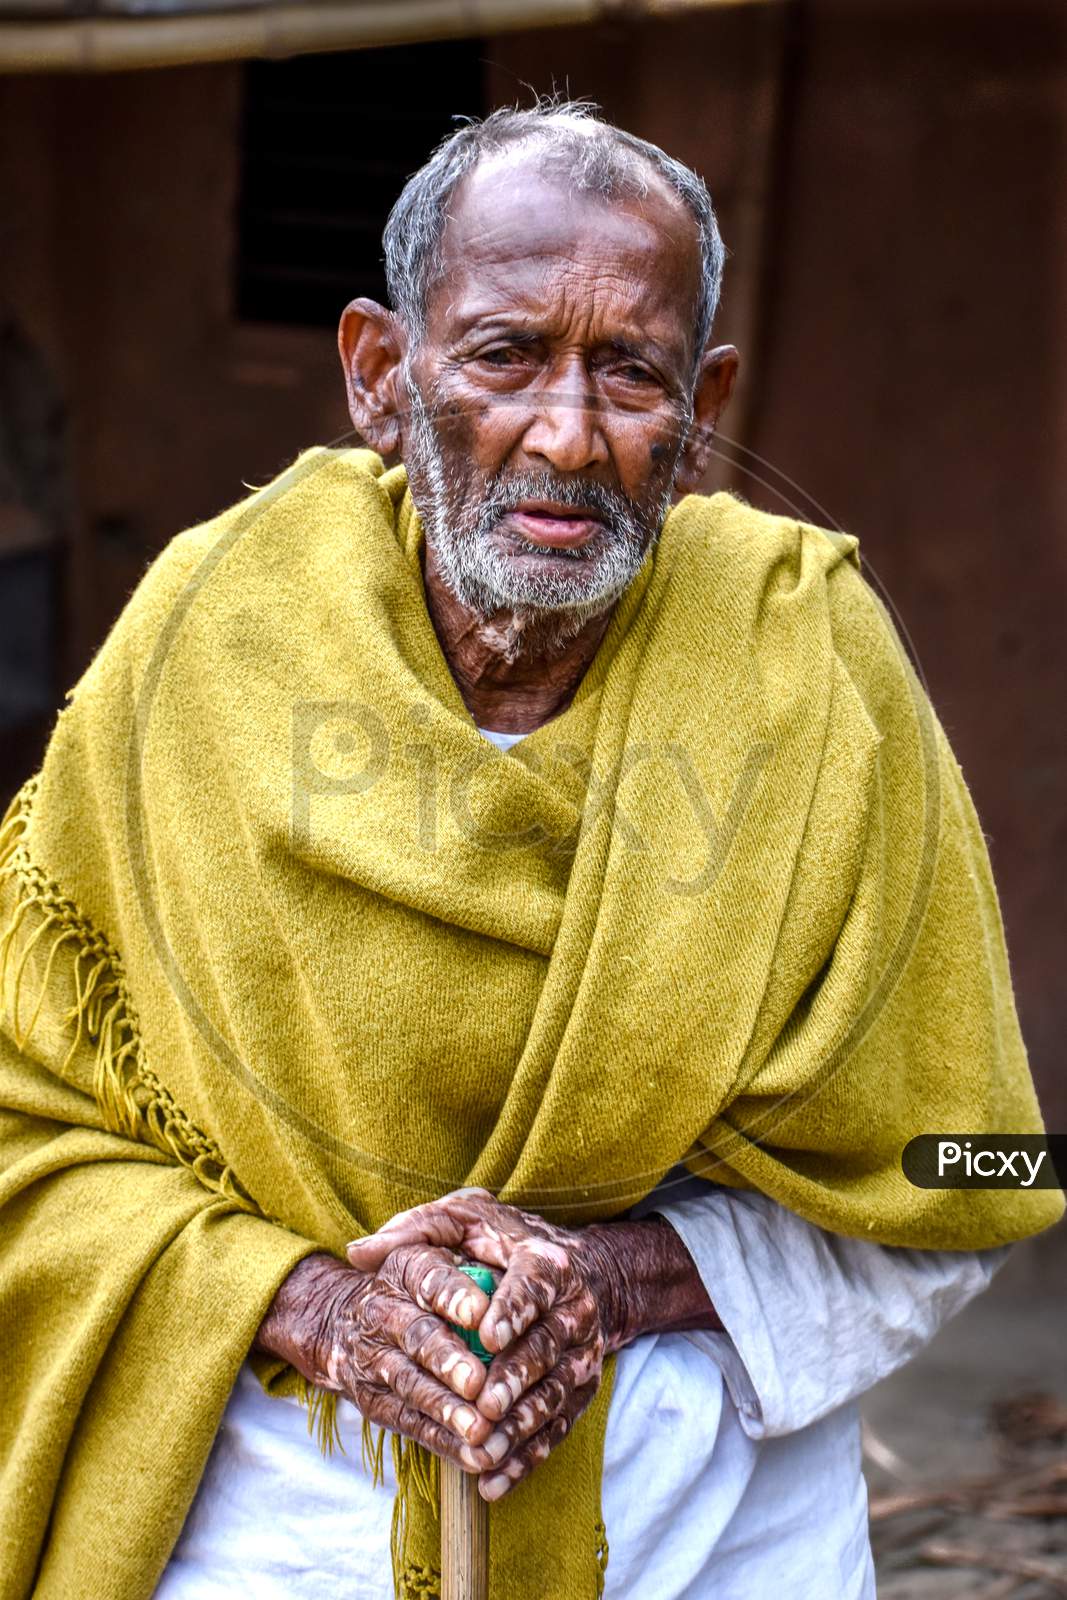 A poor and old tribal beggar of India looked in with frustration